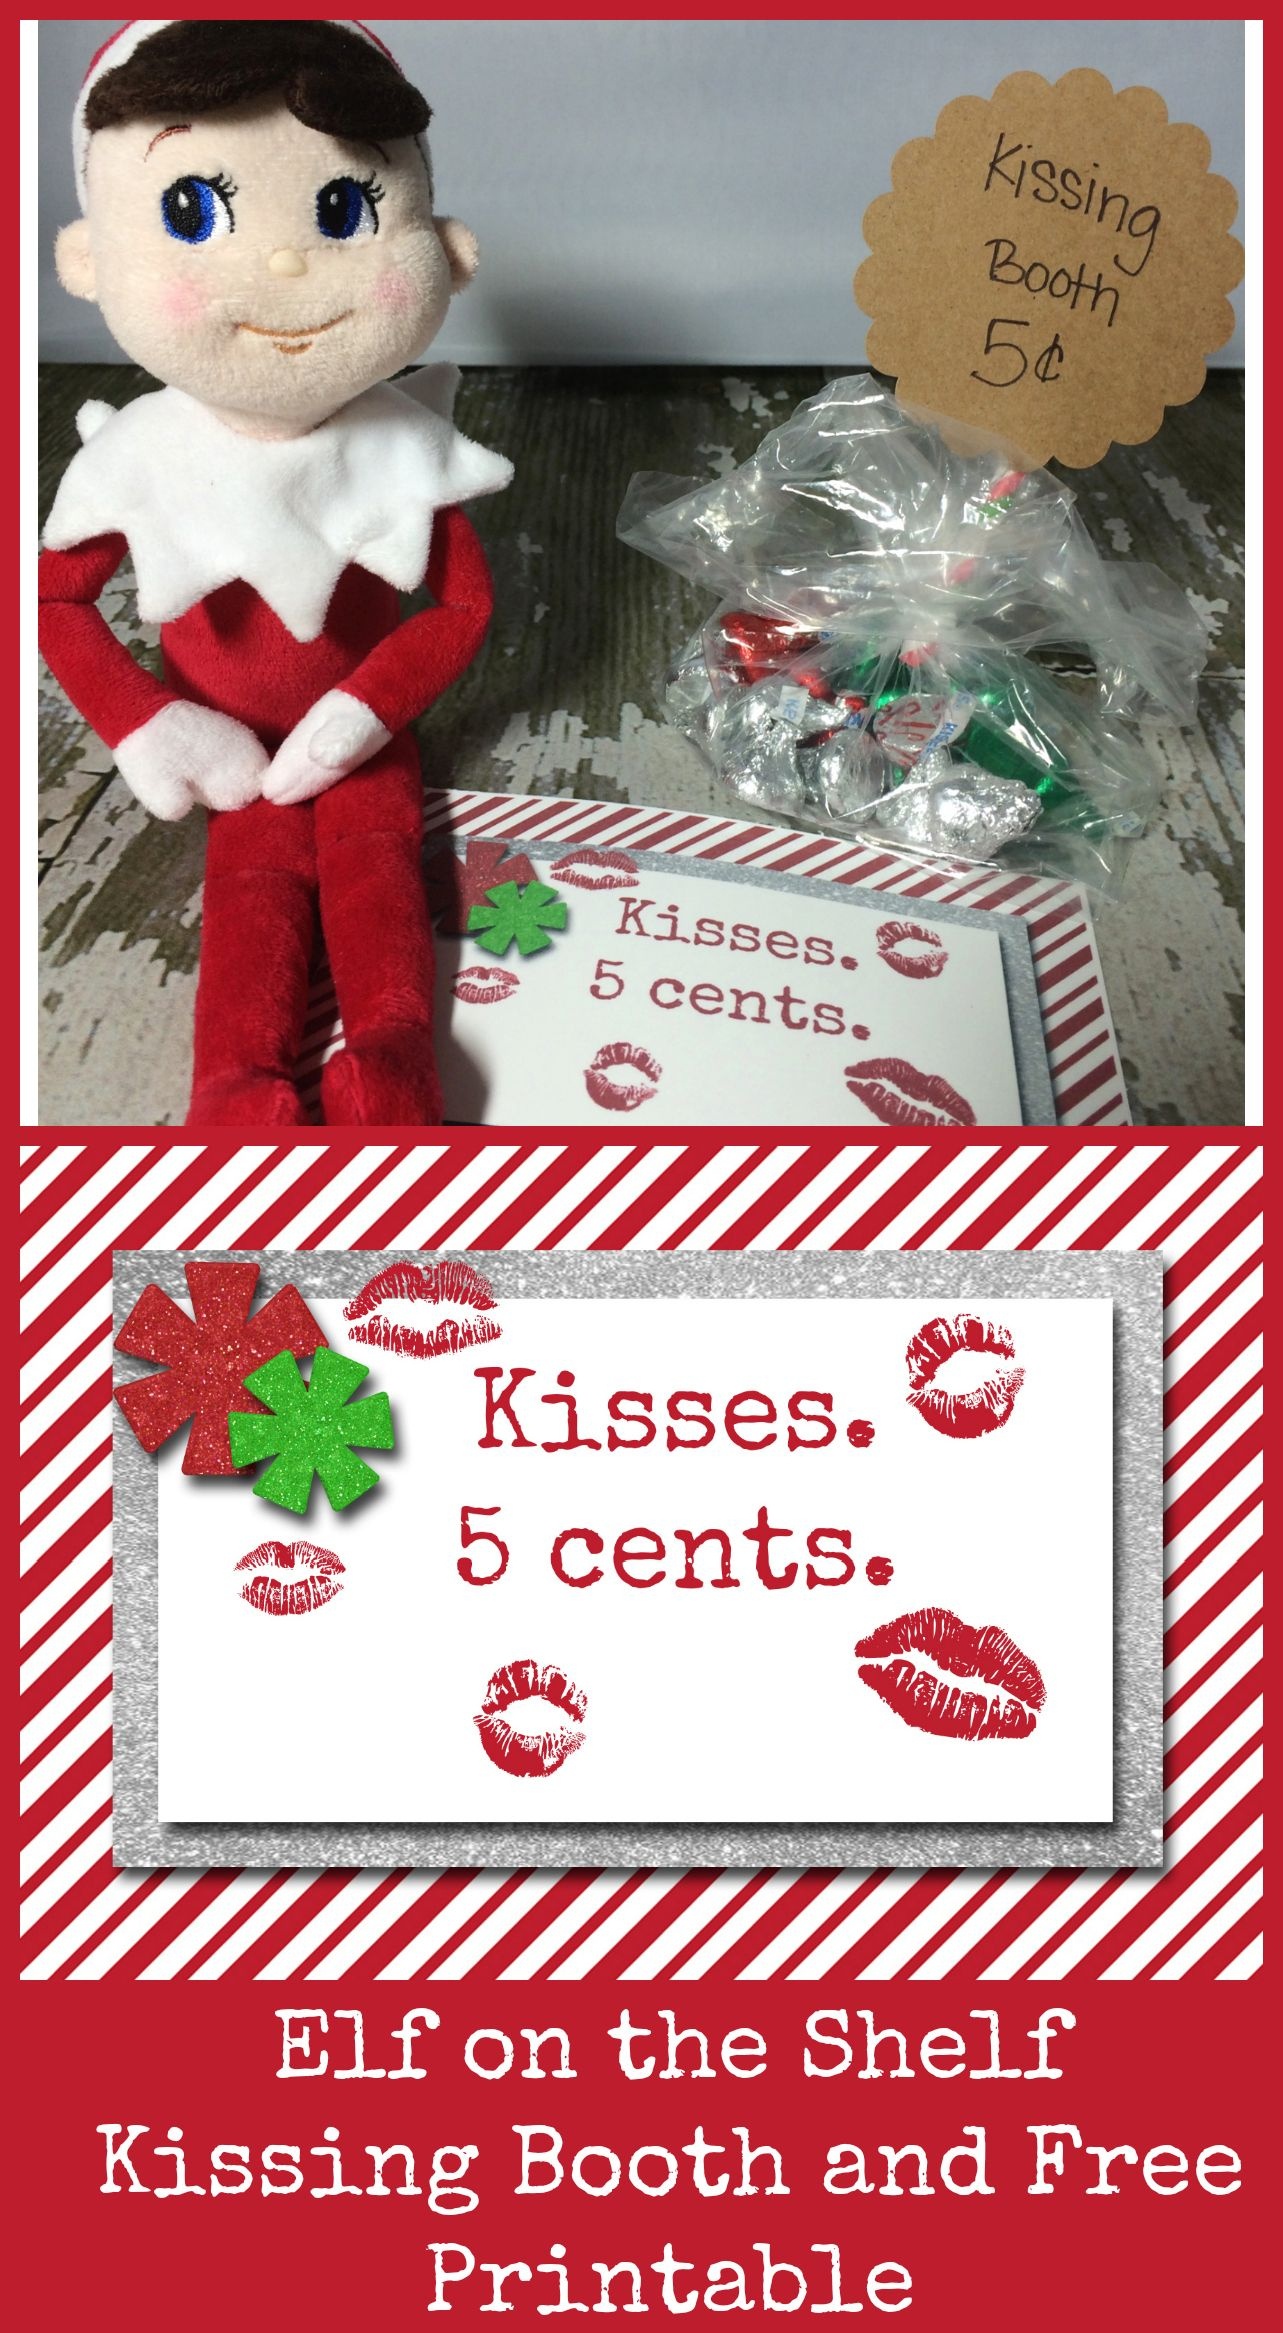 10 Easy Elf On The Shelf Ideas And A Daily Printable | Best Crafts - Elf On The Shelf Kissing Booth Free Printable